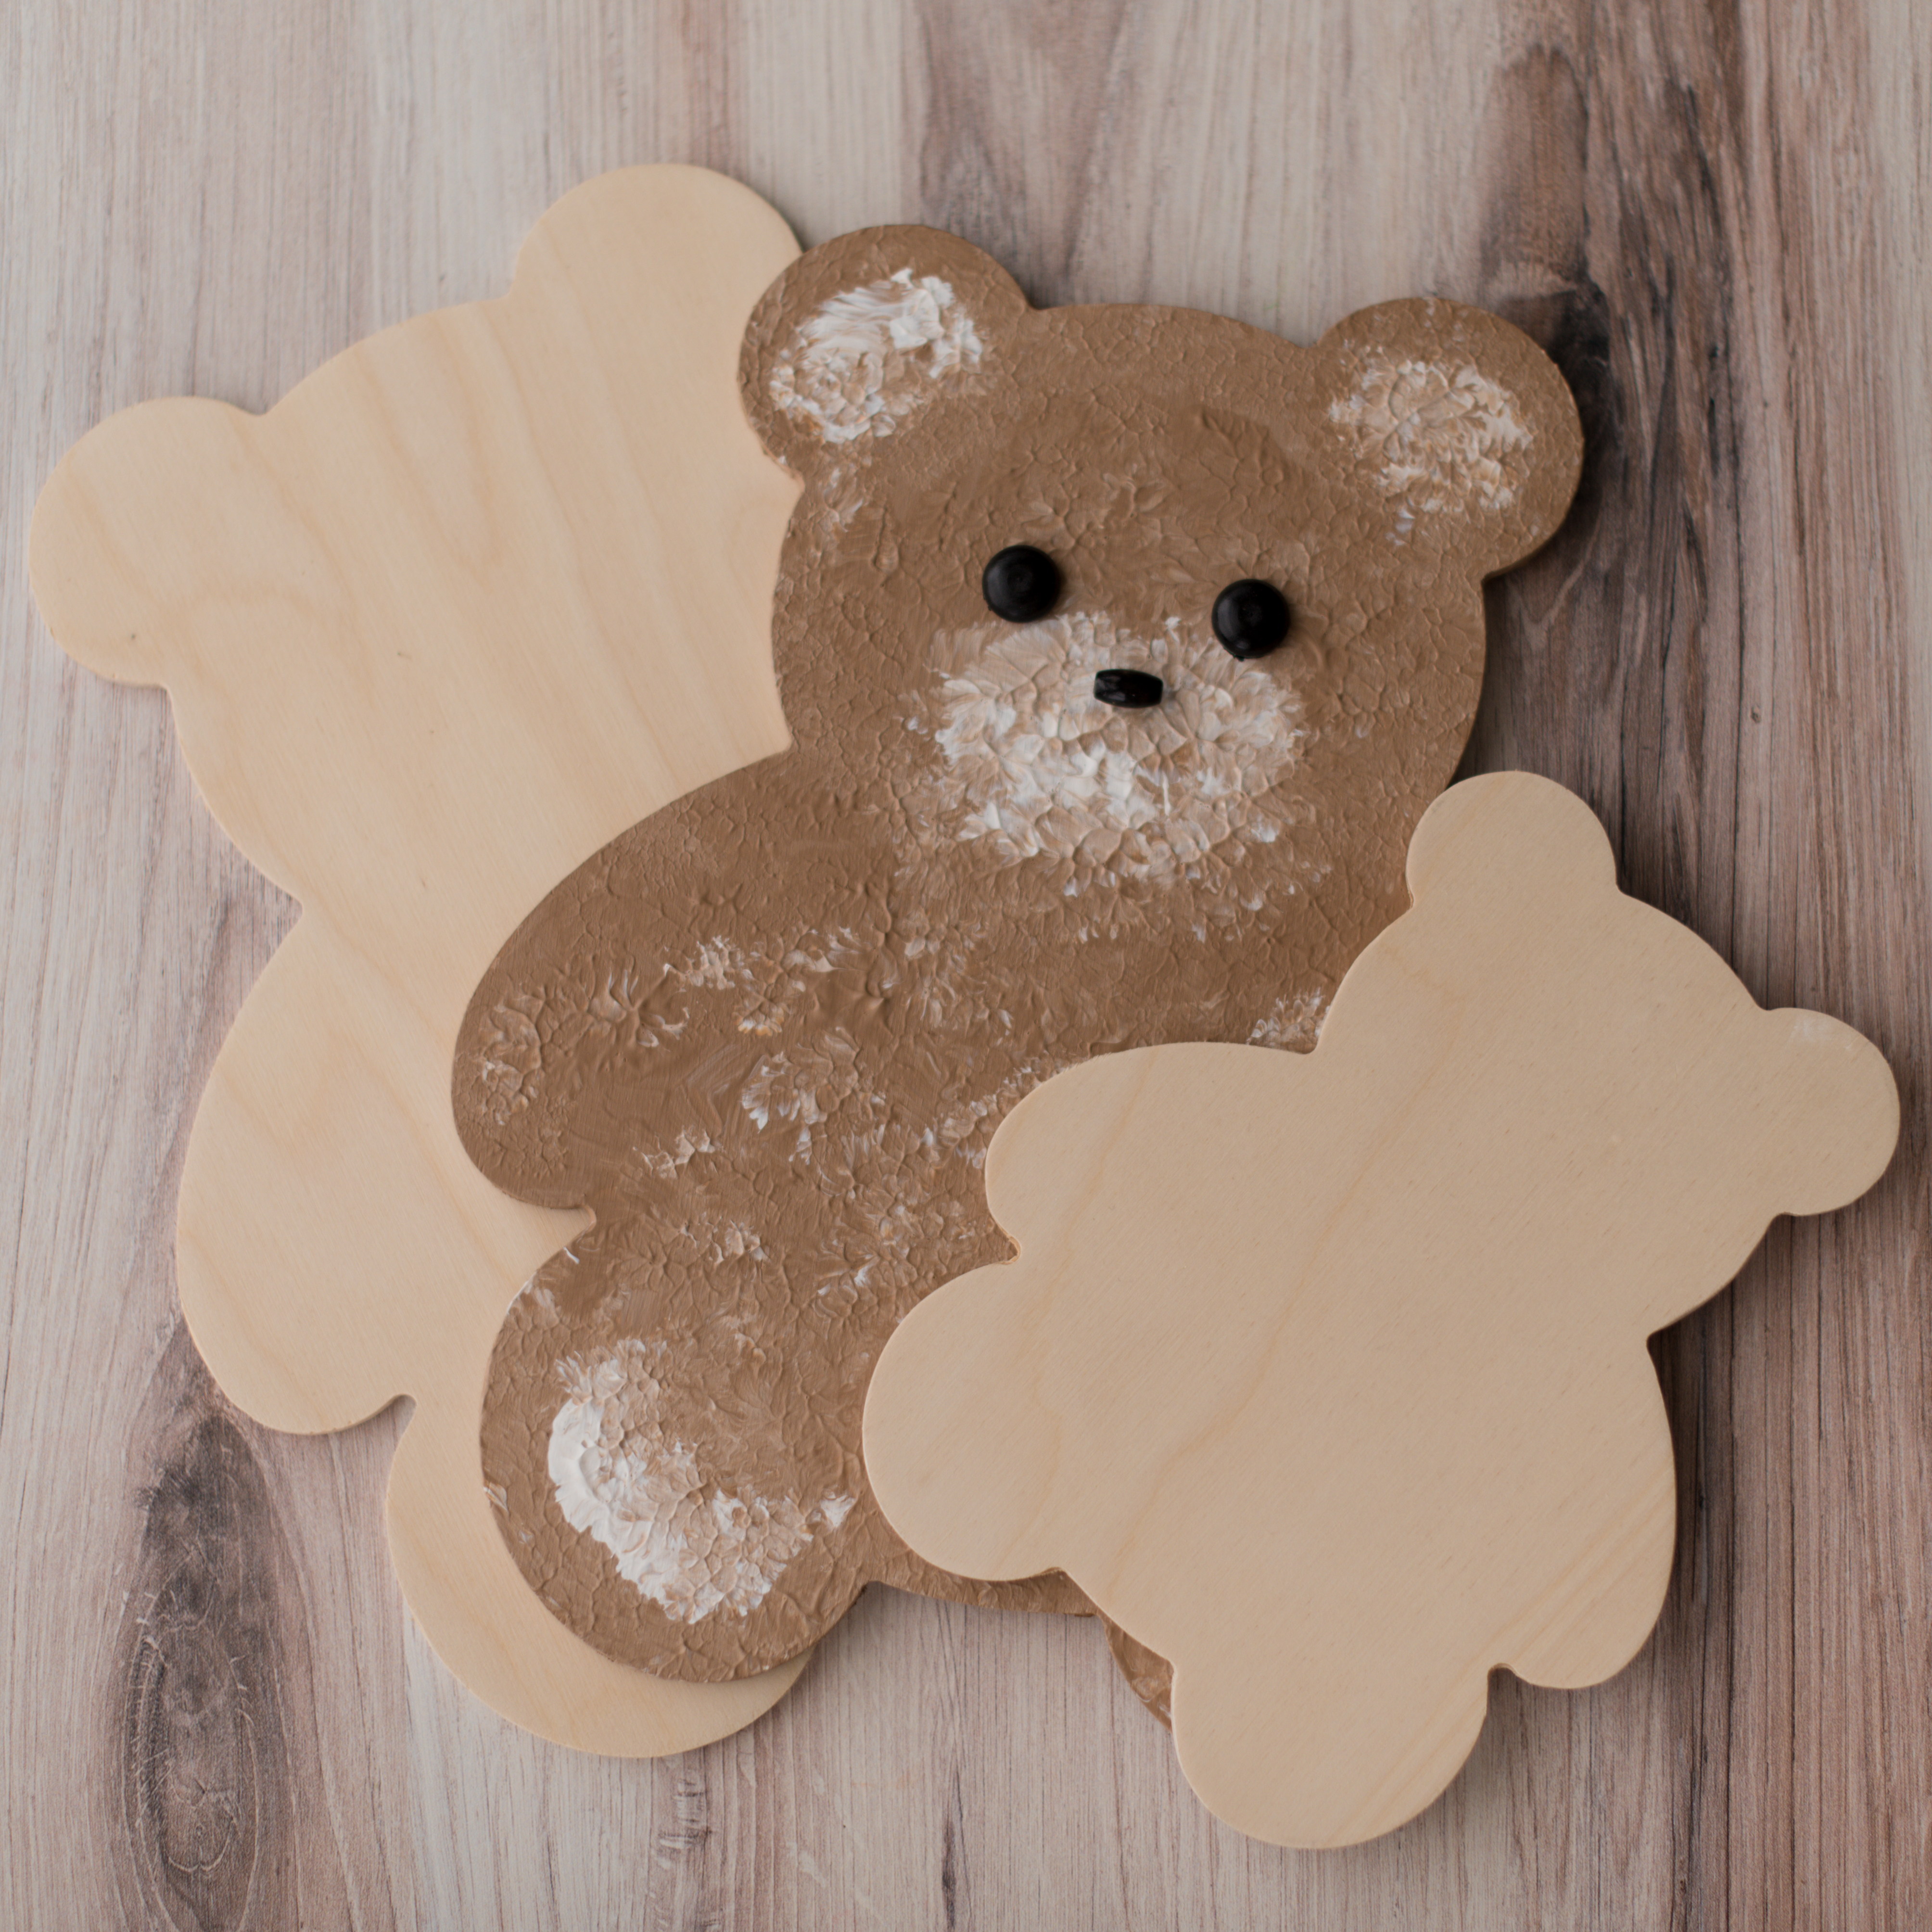 Teddy Bear Wood Cutouts 8”, Unfinished Wood Shapes for Crafts/Decor, Woodpeckers